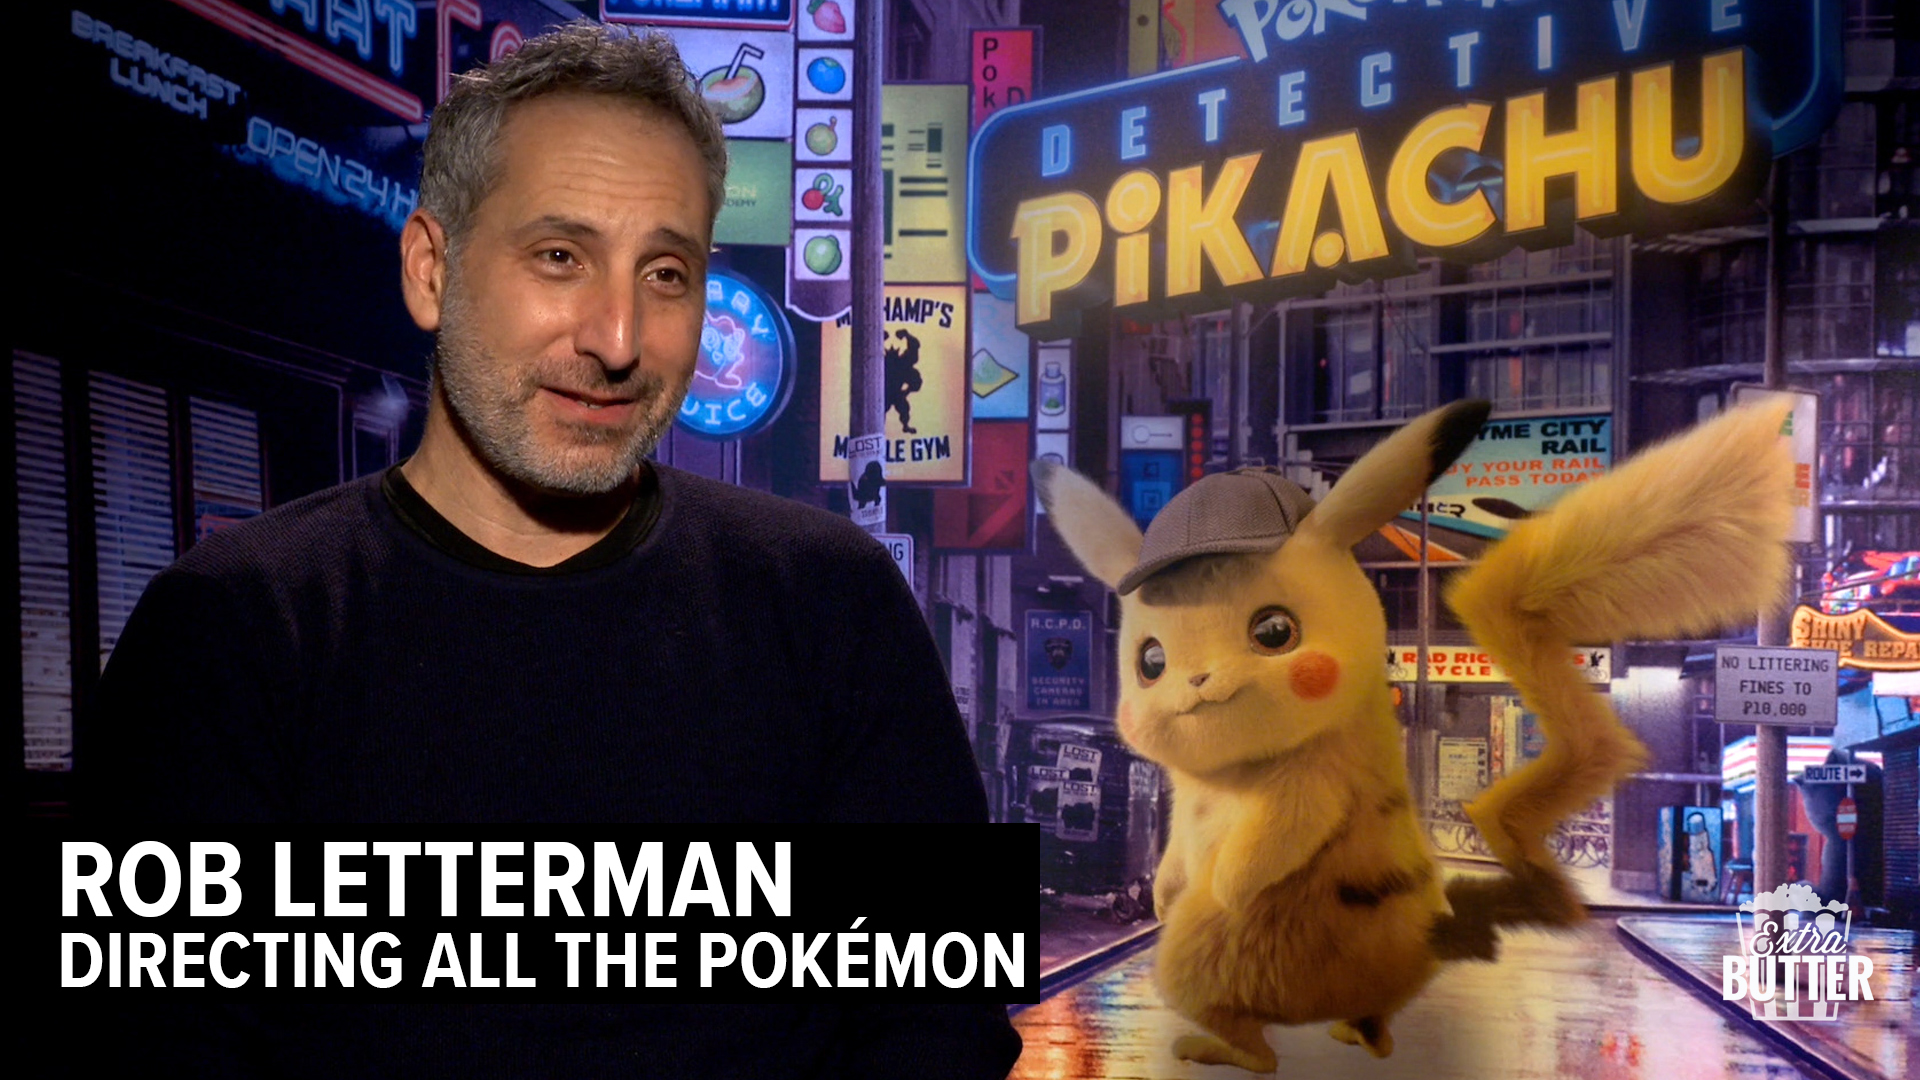 Rob Letterman sits down with Mariaagloriaa to talk about all the Pokémon he got into the movie and landing Ryan Reynolds. Interview arranged by Warner Bros. Pictures.